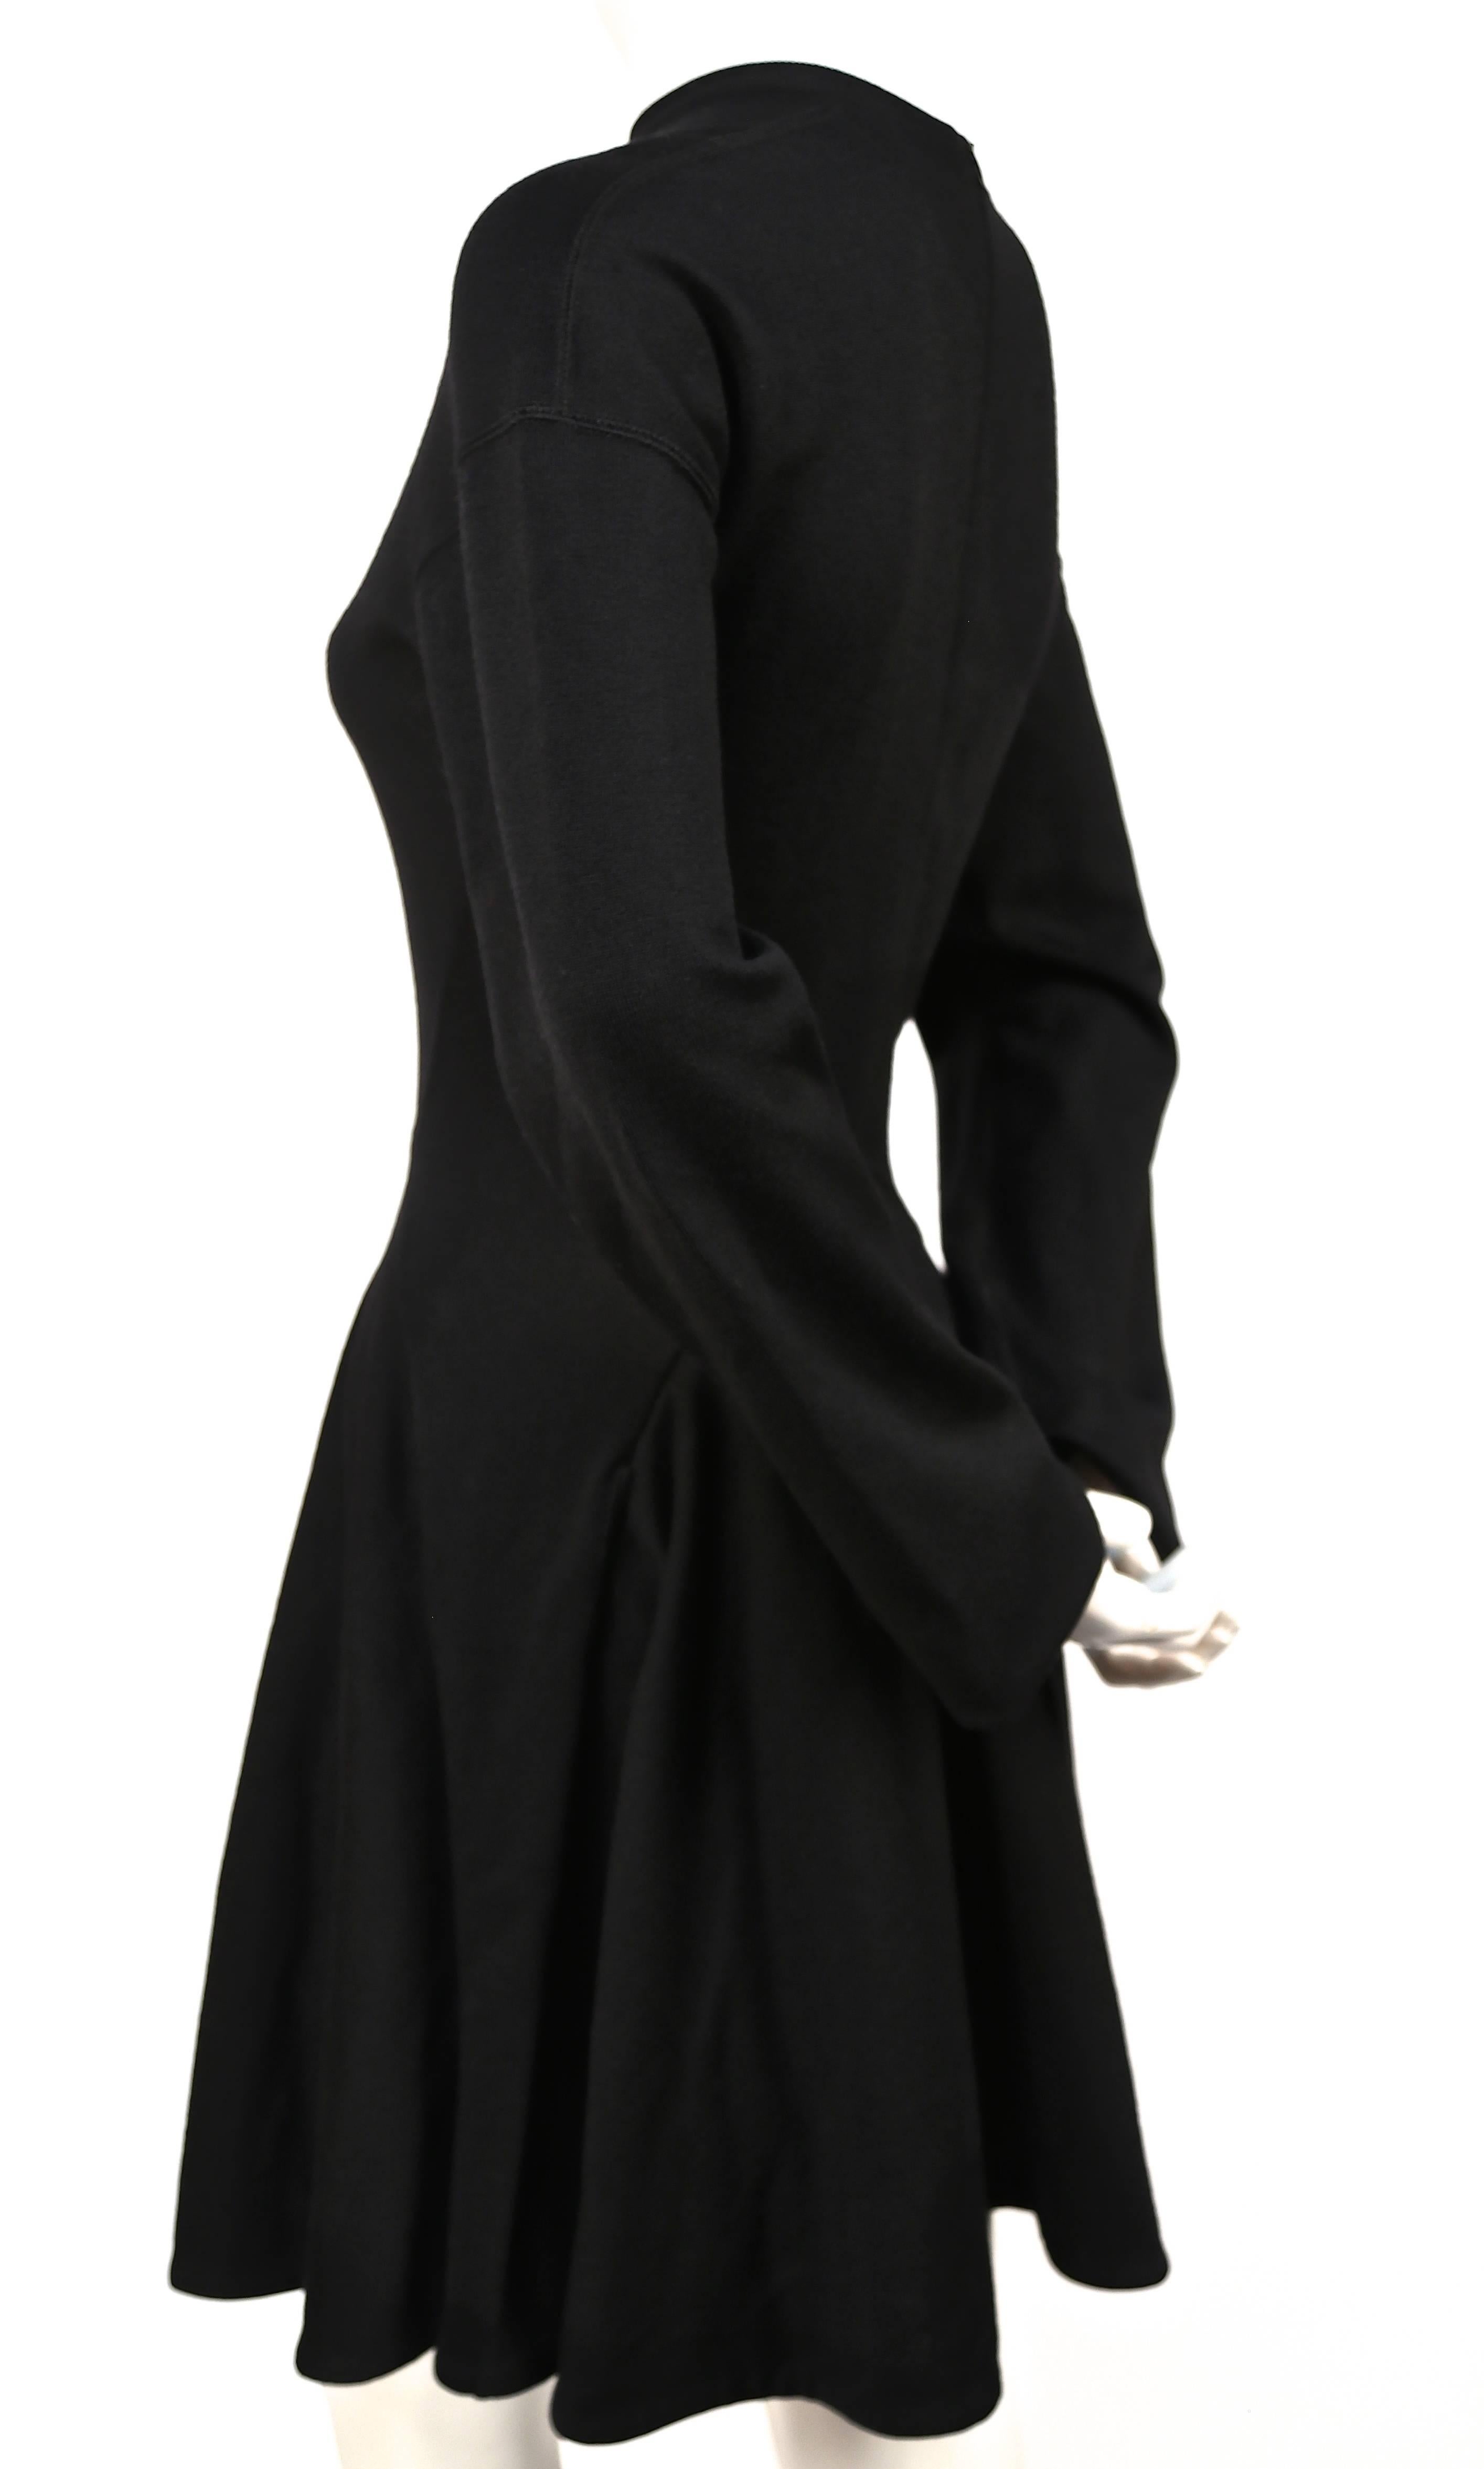 Incredibly flattering jet black seamed wool-dress with full skirt from Azzedine Alaia dating to the 1990's. Fits a size S or M.  Unstretched waist measures 26